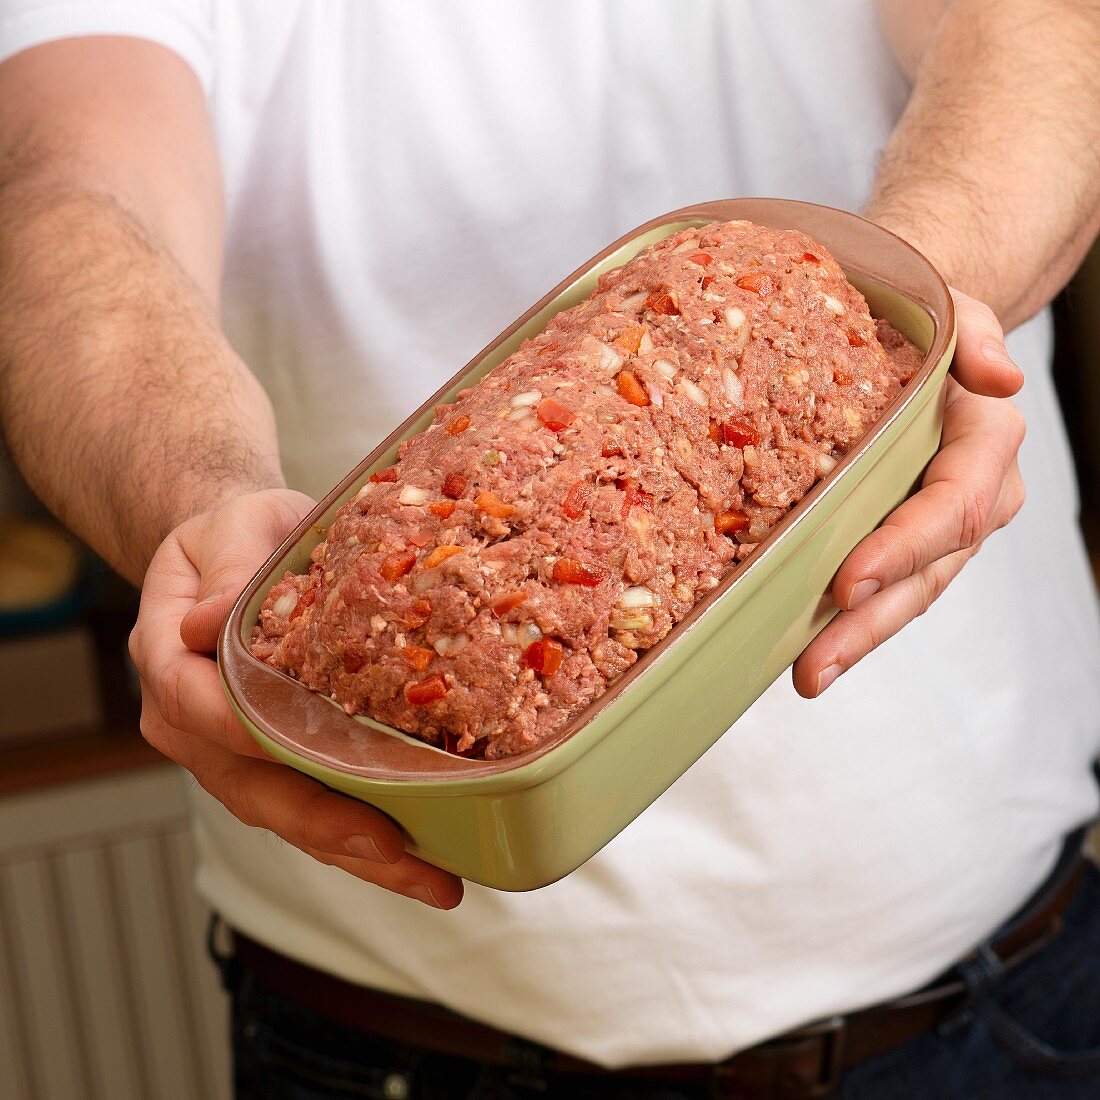 Hands holding raw Mexican meat loaf in green ceramic baking dish